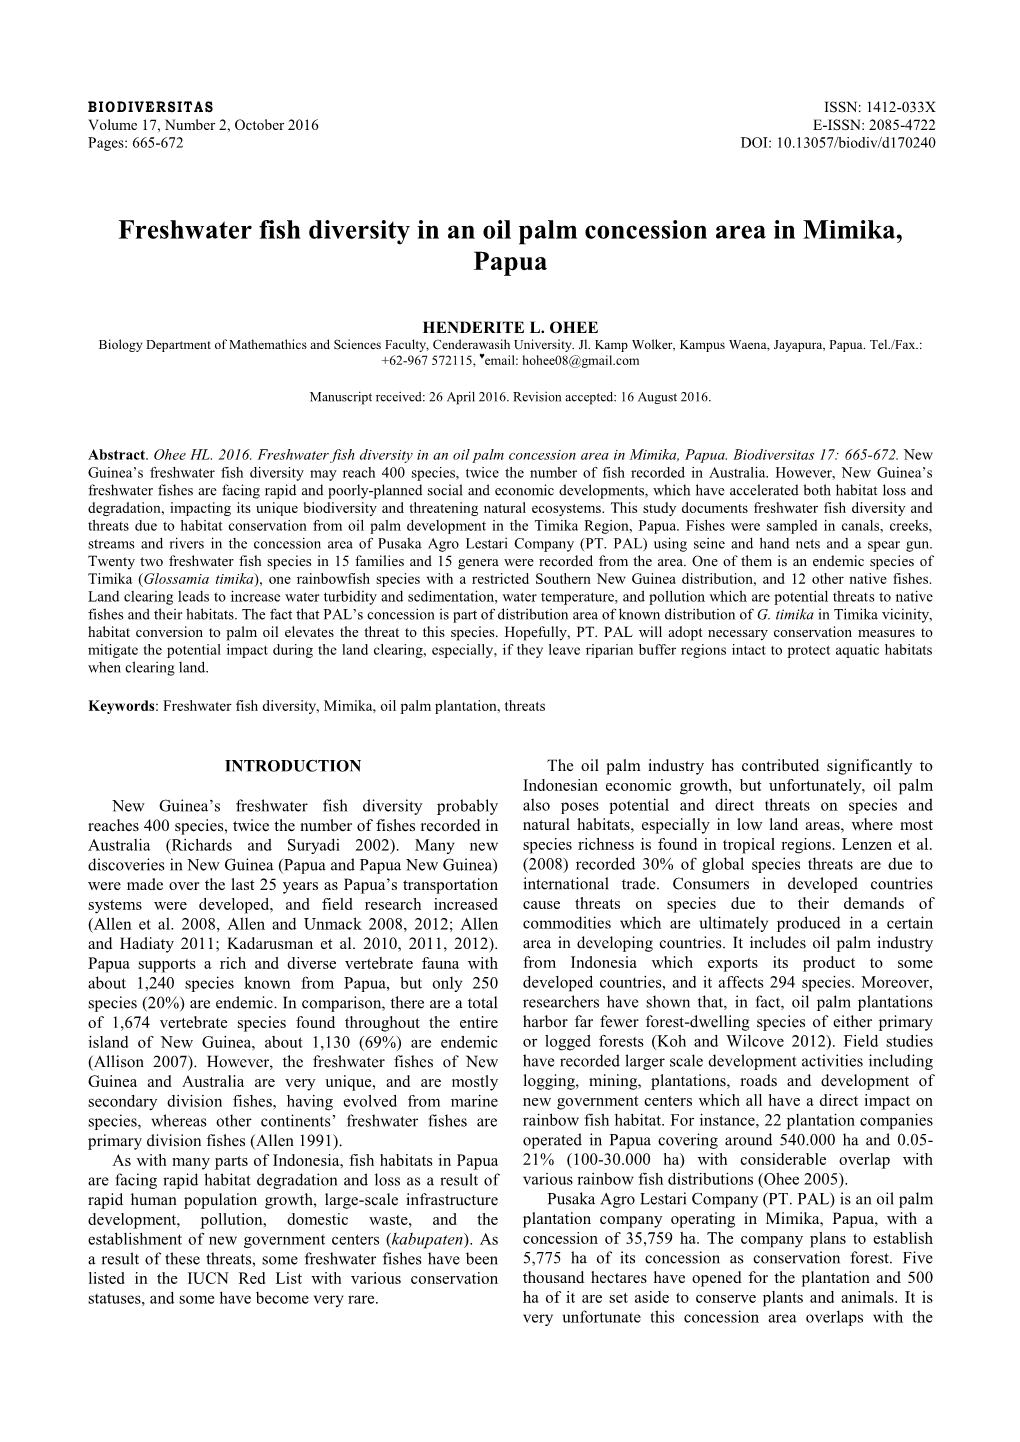 Freshwater Fish Diversity in an Oil Palm Concession Area in Mimika, Papua